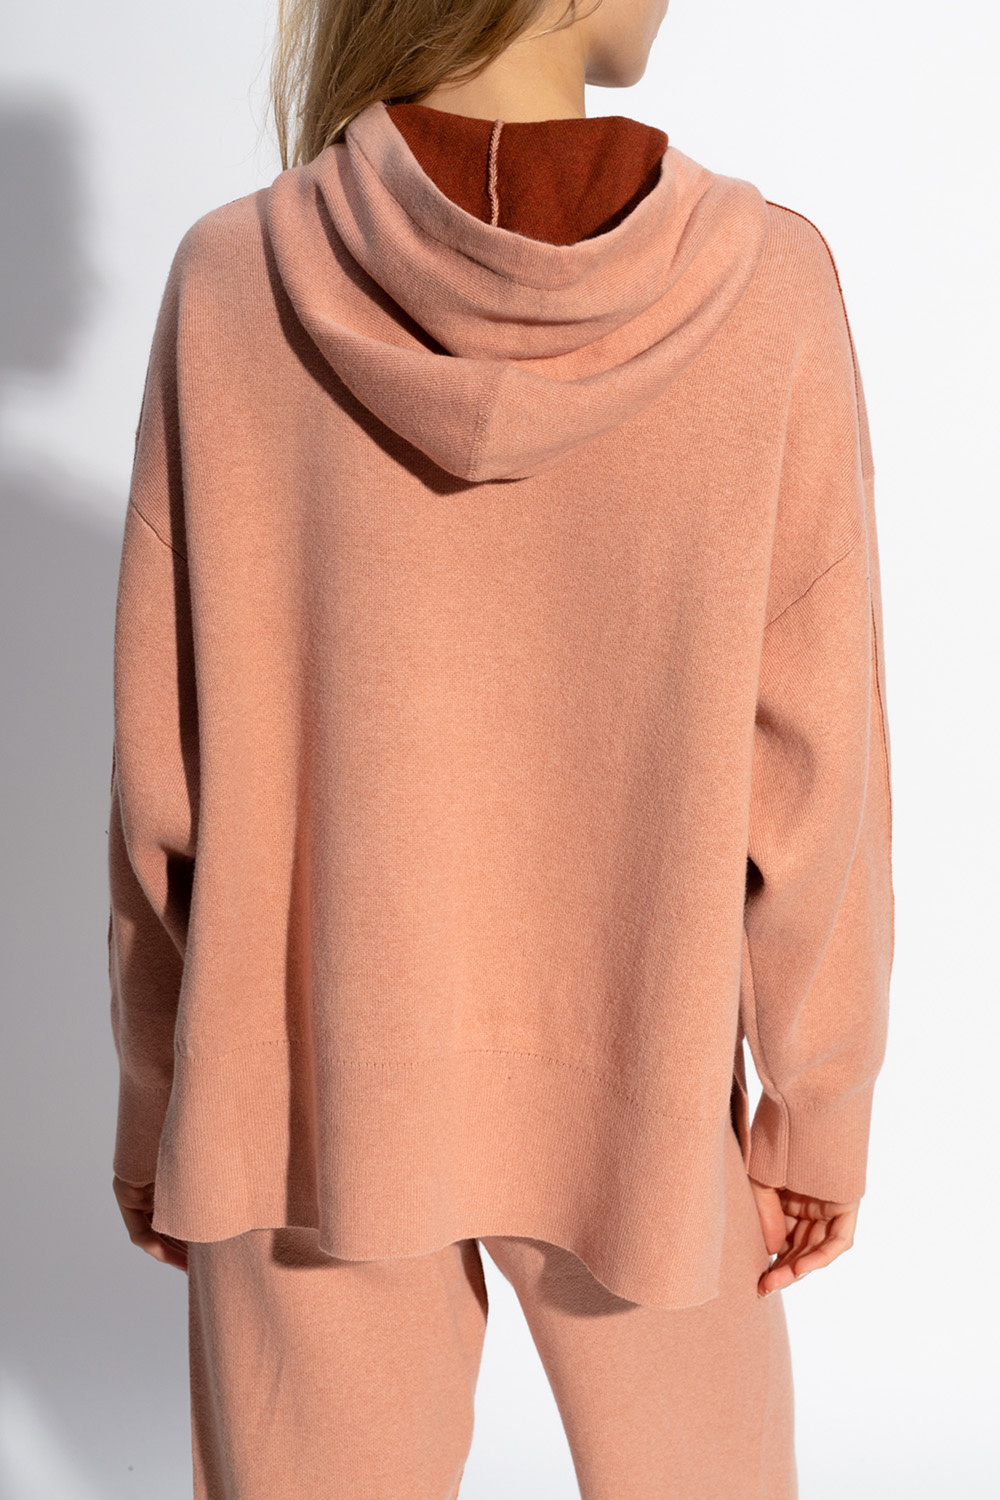 proenza schouler off shoulder ribbed knit sweater Hooded sweater